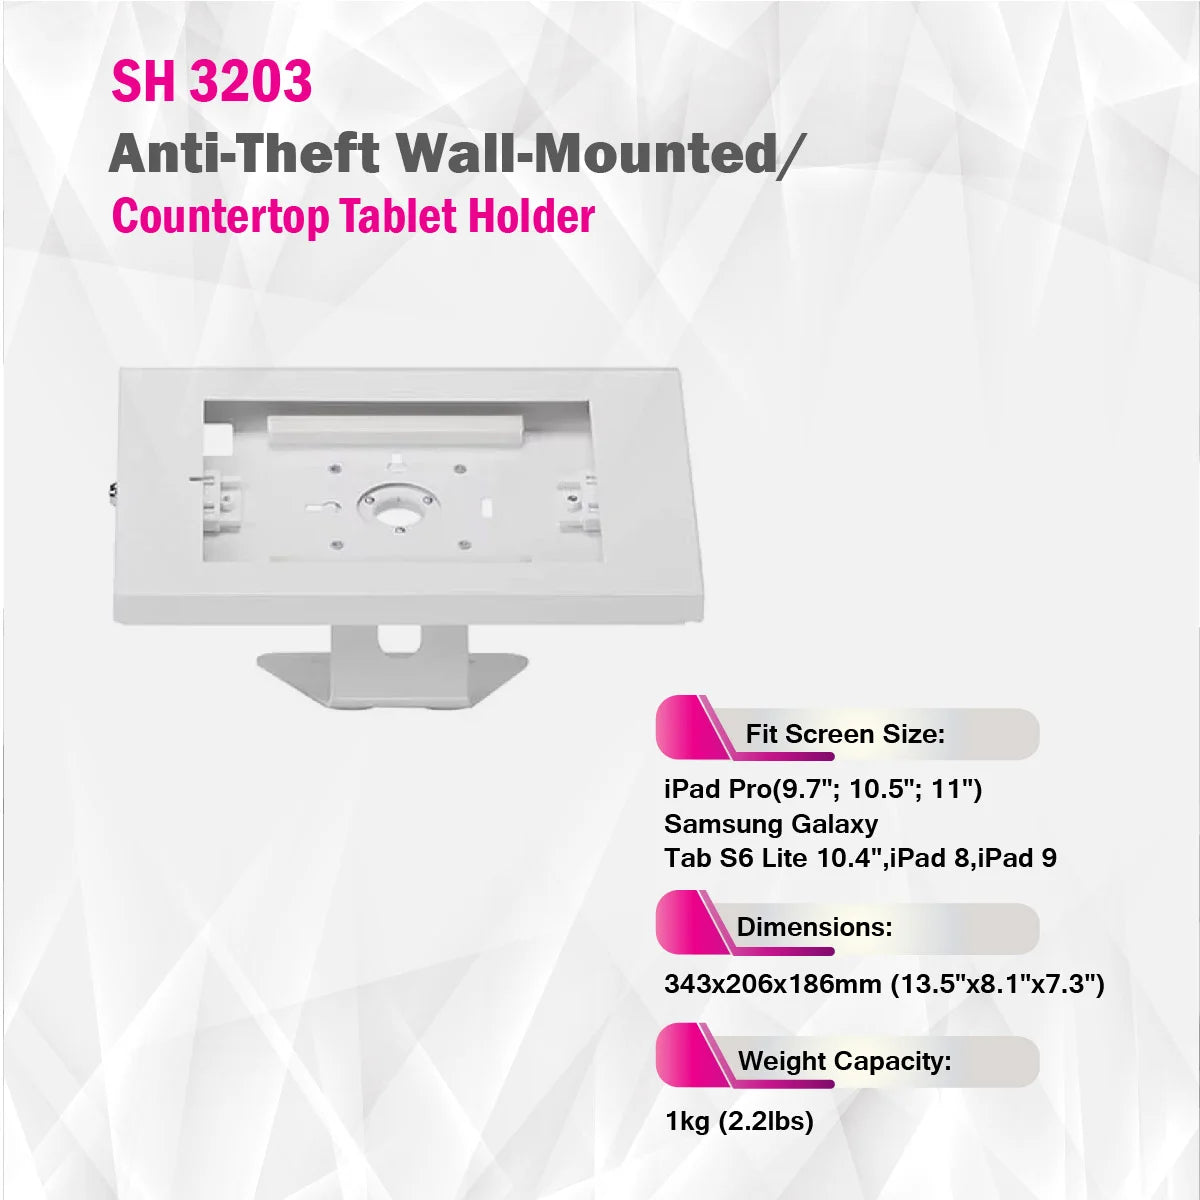 SkillTech - SH 3203 - Anti-Theft Wall-Mounted/Countertop Tablet Holder